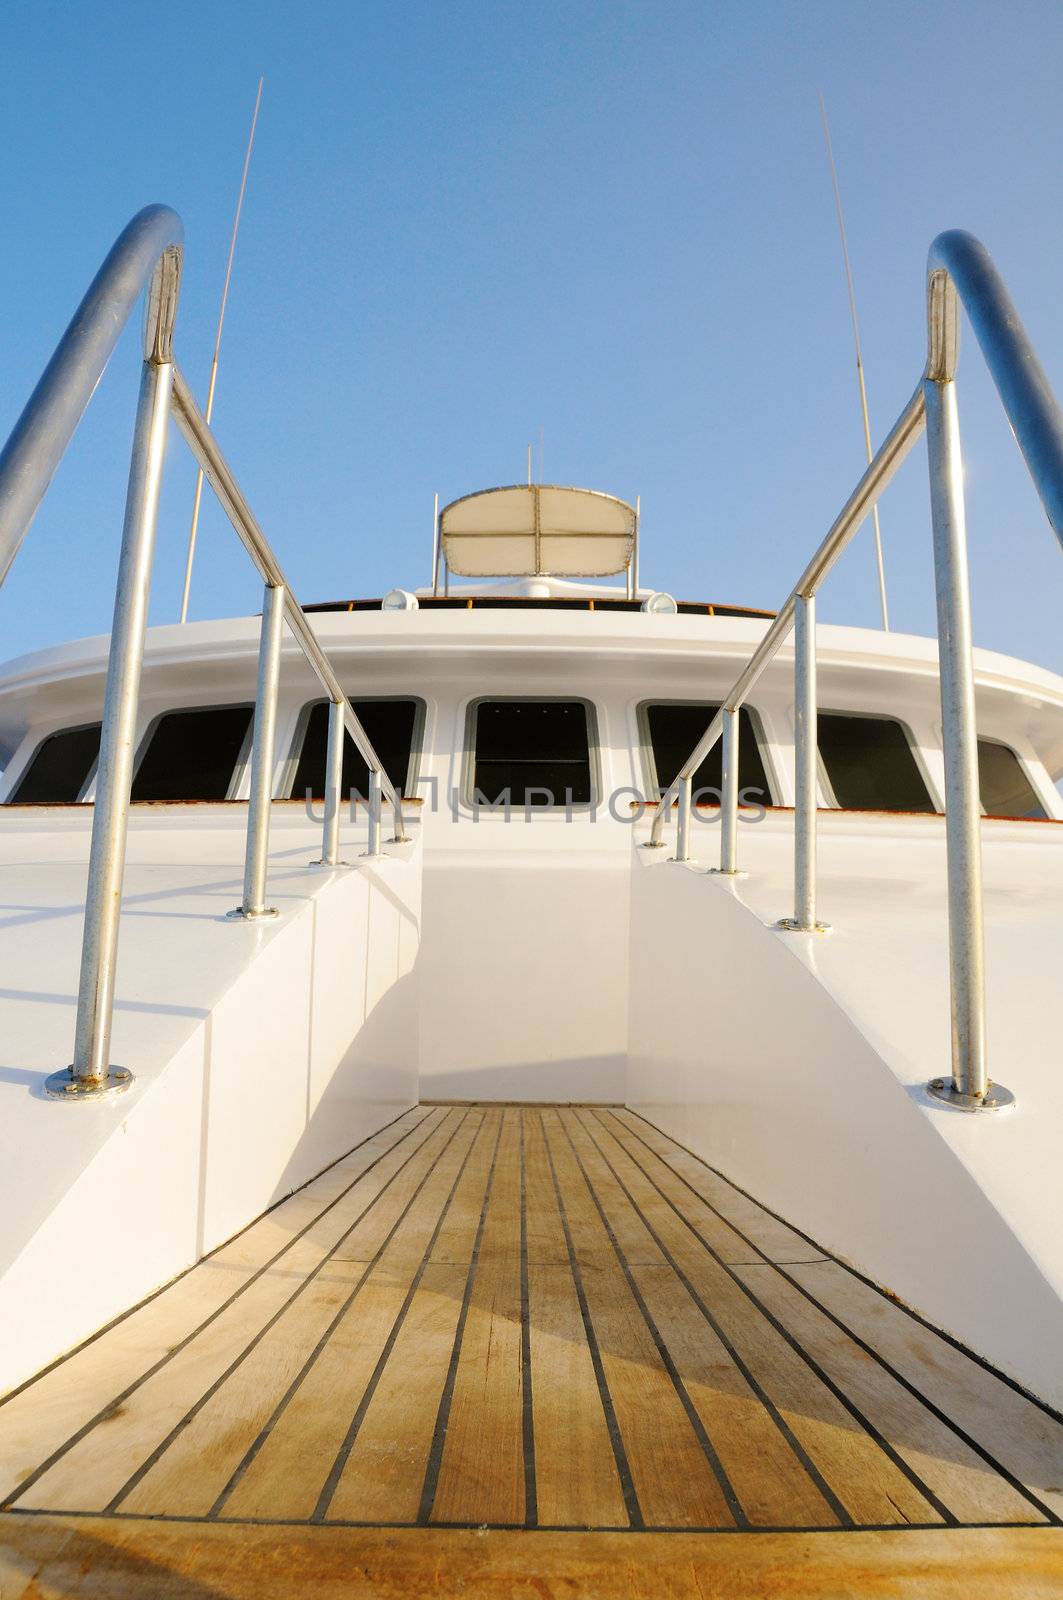 Deck of big wooden marine yacht with ladder and deck cabin